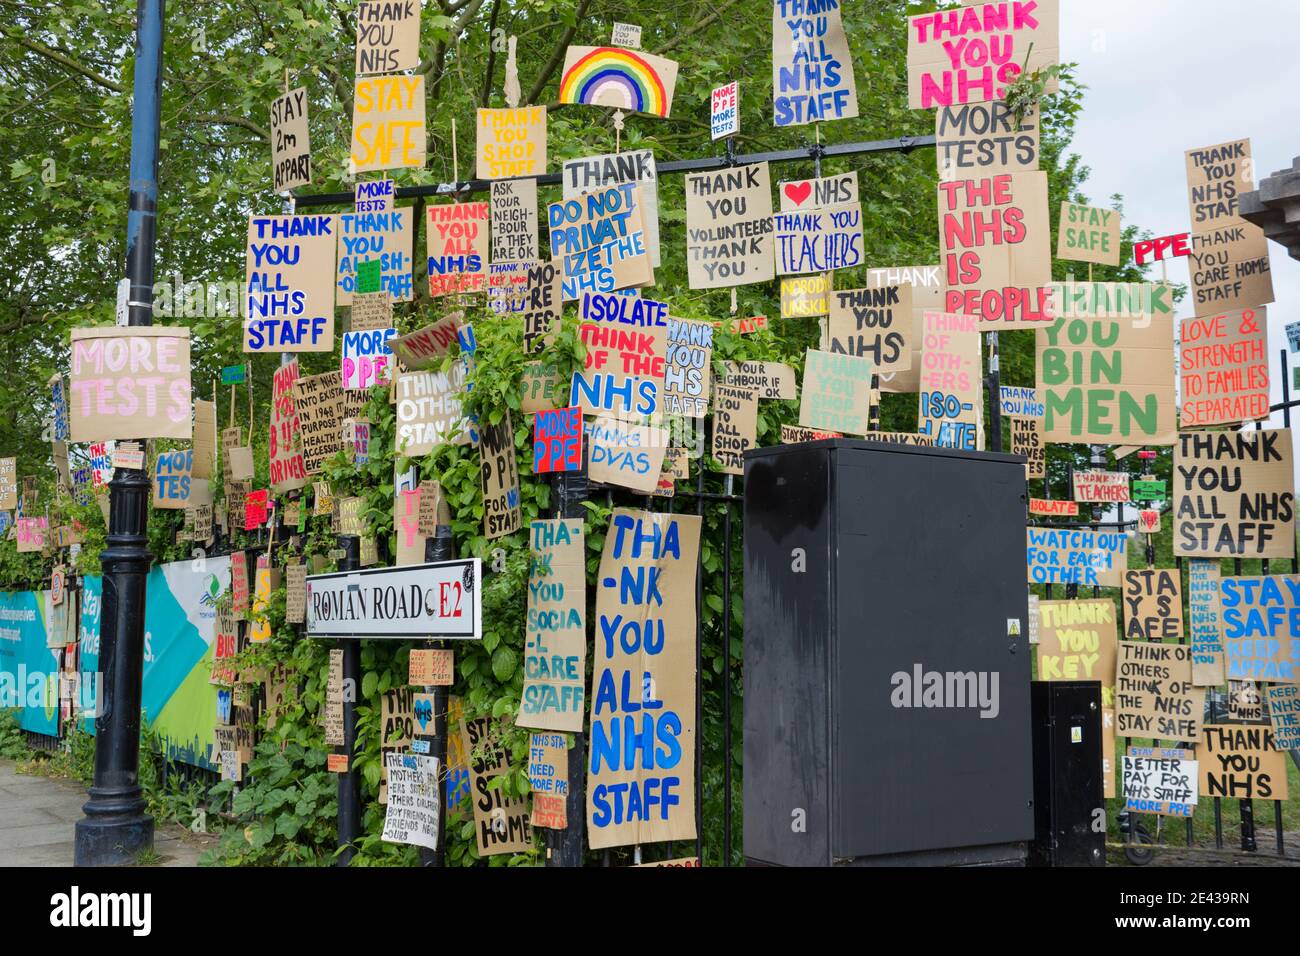 Thank you NHS sign paintings hang on fence in London park in roman road, England Stock Photo